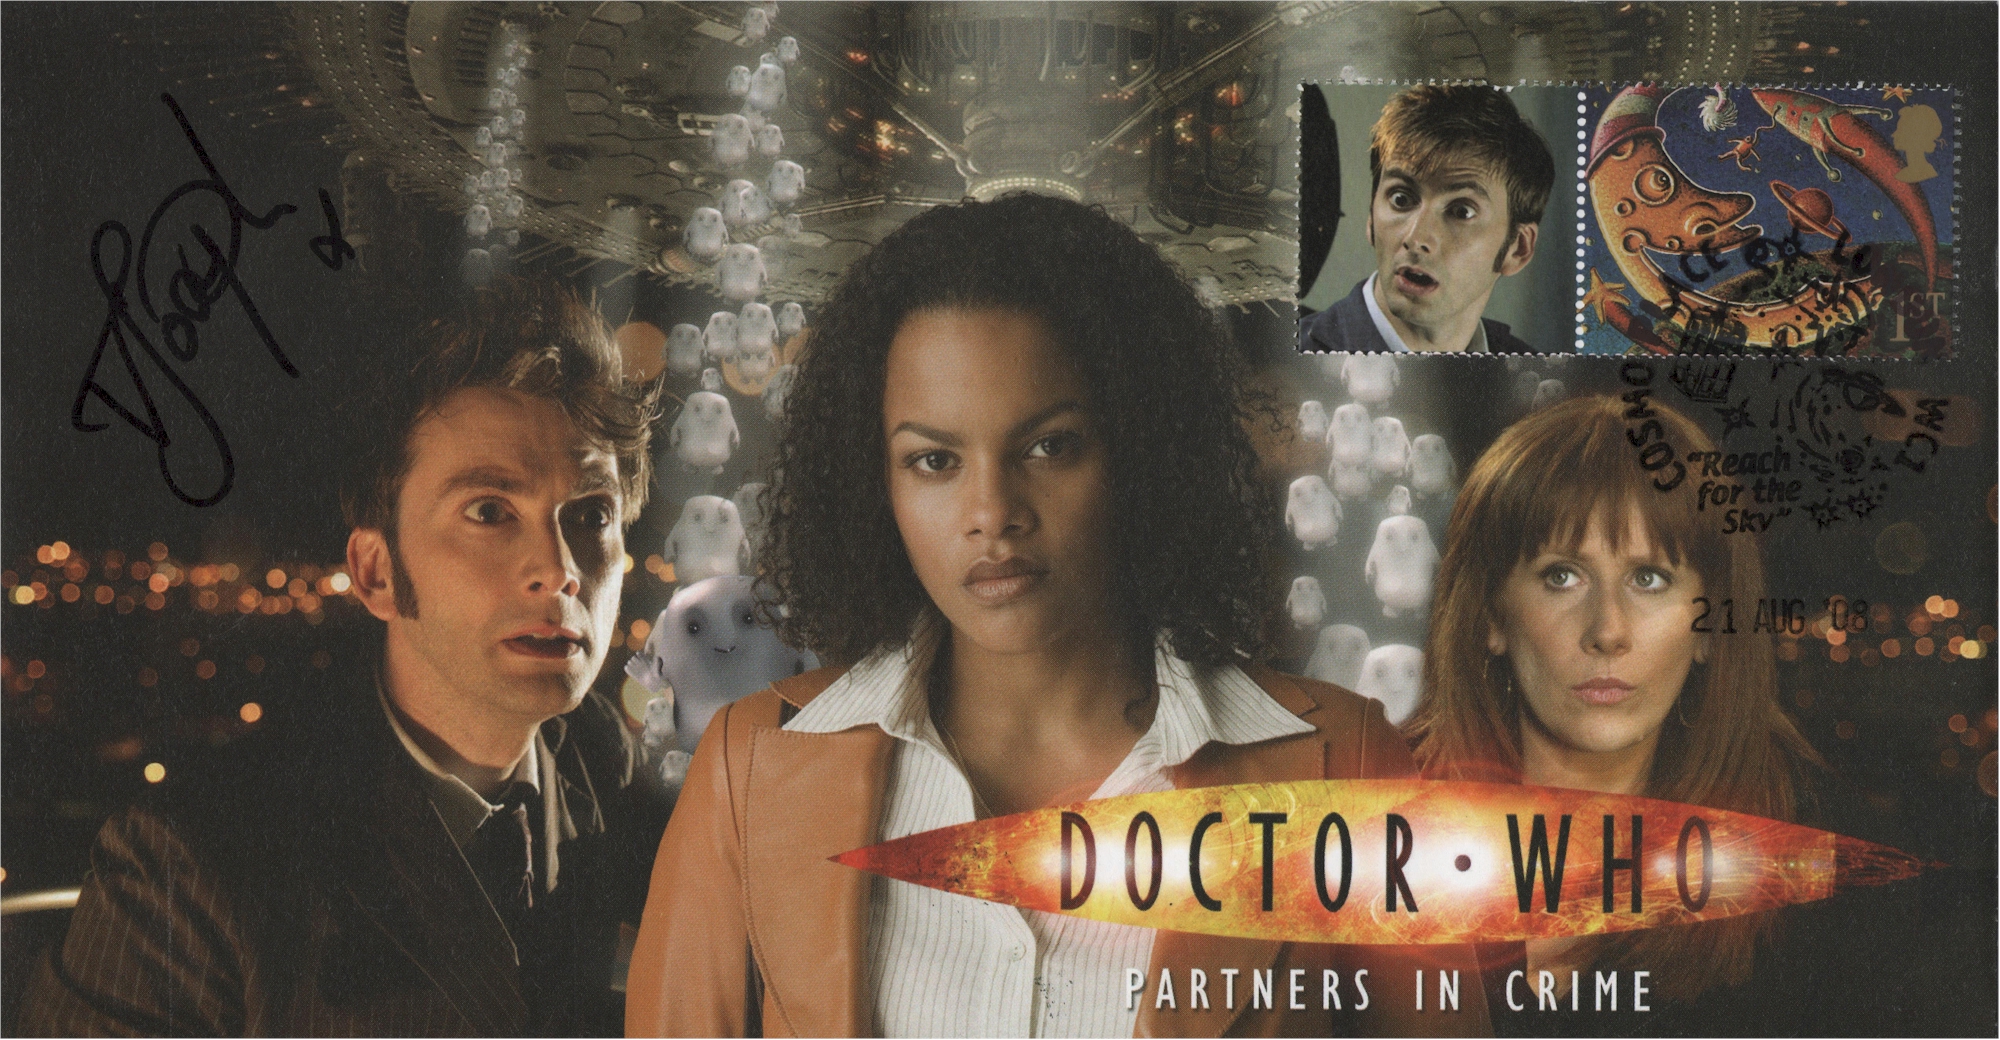 Doctor Who 2008 Series 4 Episode 1 Partners In Crime Collectible Stamp Cover Signed by VERONA JOSEPH